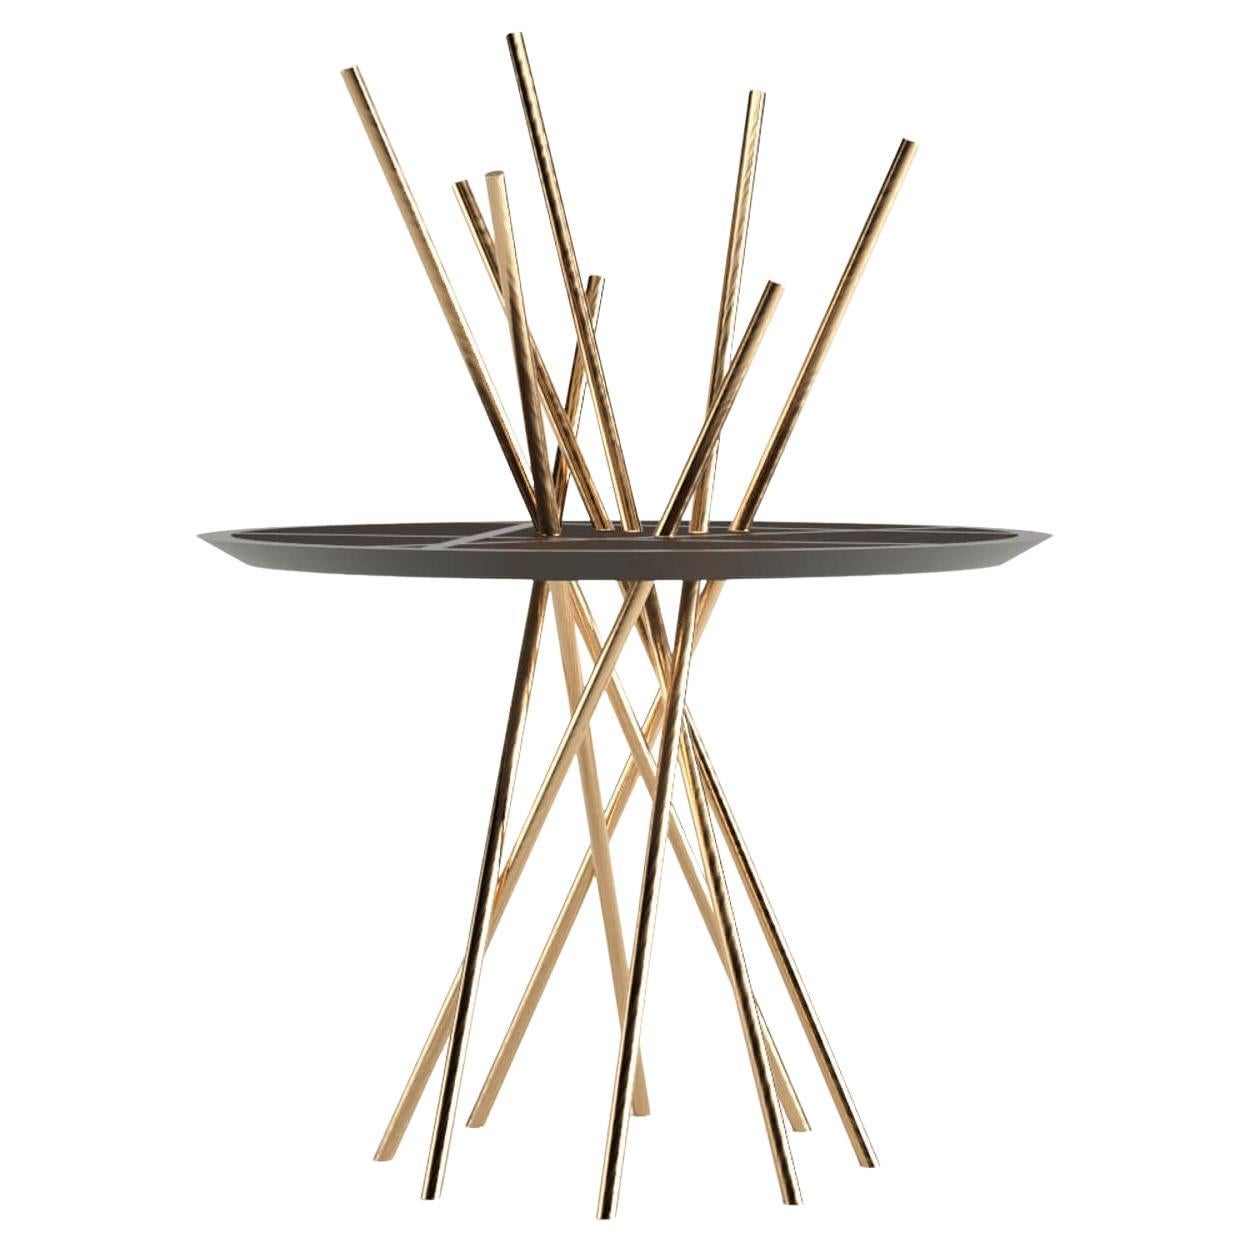 The Mikado Collection is inspired by the game “Pick a stick” we used to play in childhood. Tubes of brass, which remind us of the Mikado sticks game, are cut at precise angles and fitted with great accuracy in the furniture providing much-needed